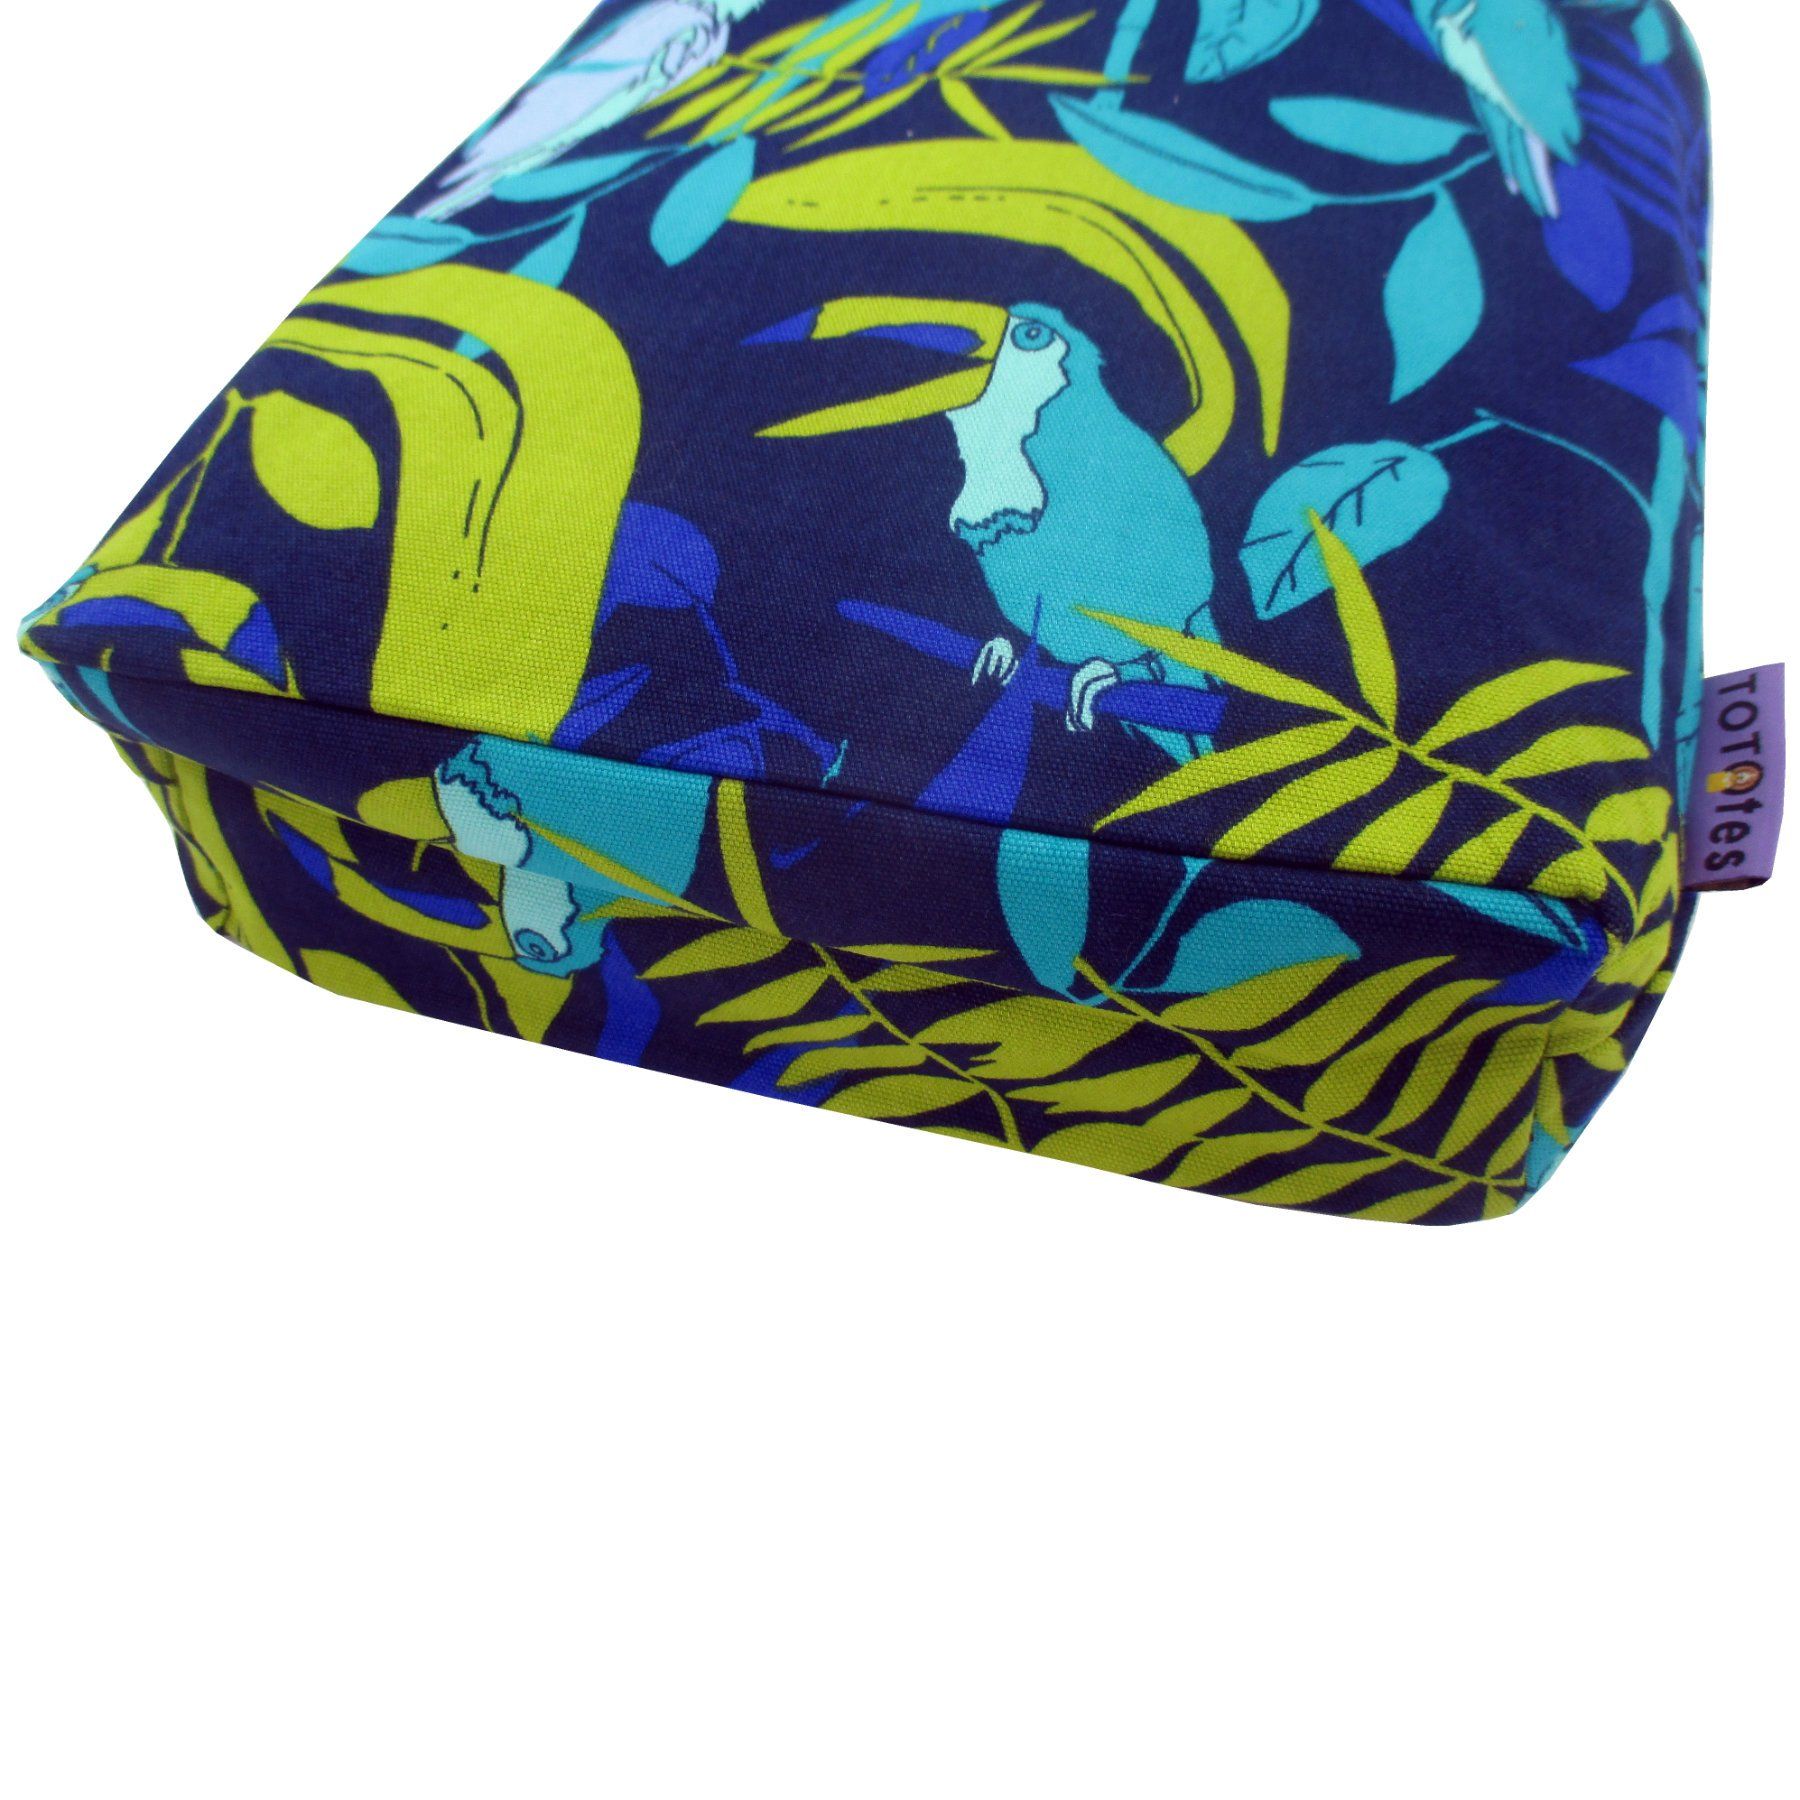 This jungle inspired bag features a blue green print made up of parrots and toucans against tropical leaves in the background.